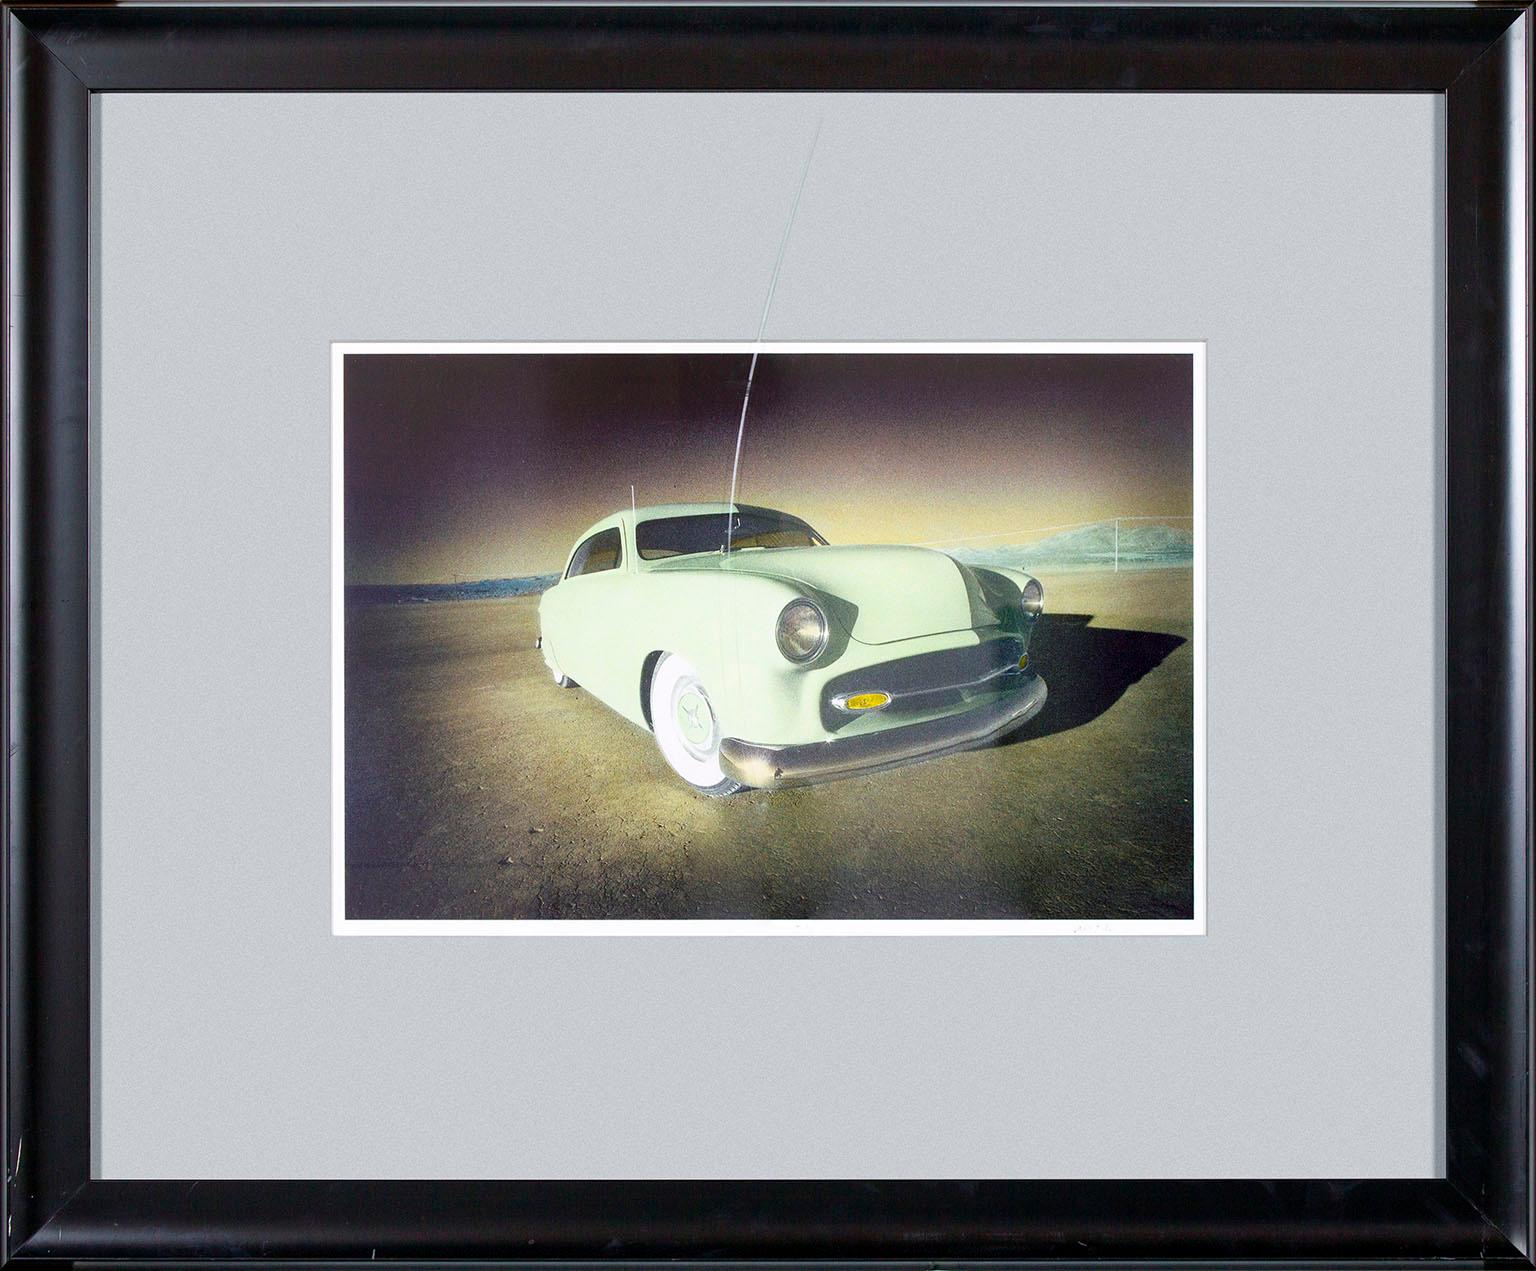 Michael Farr Color Photograph - Photo of vintage green car from original Hard Rock Hotel and Casino in Las Vegas